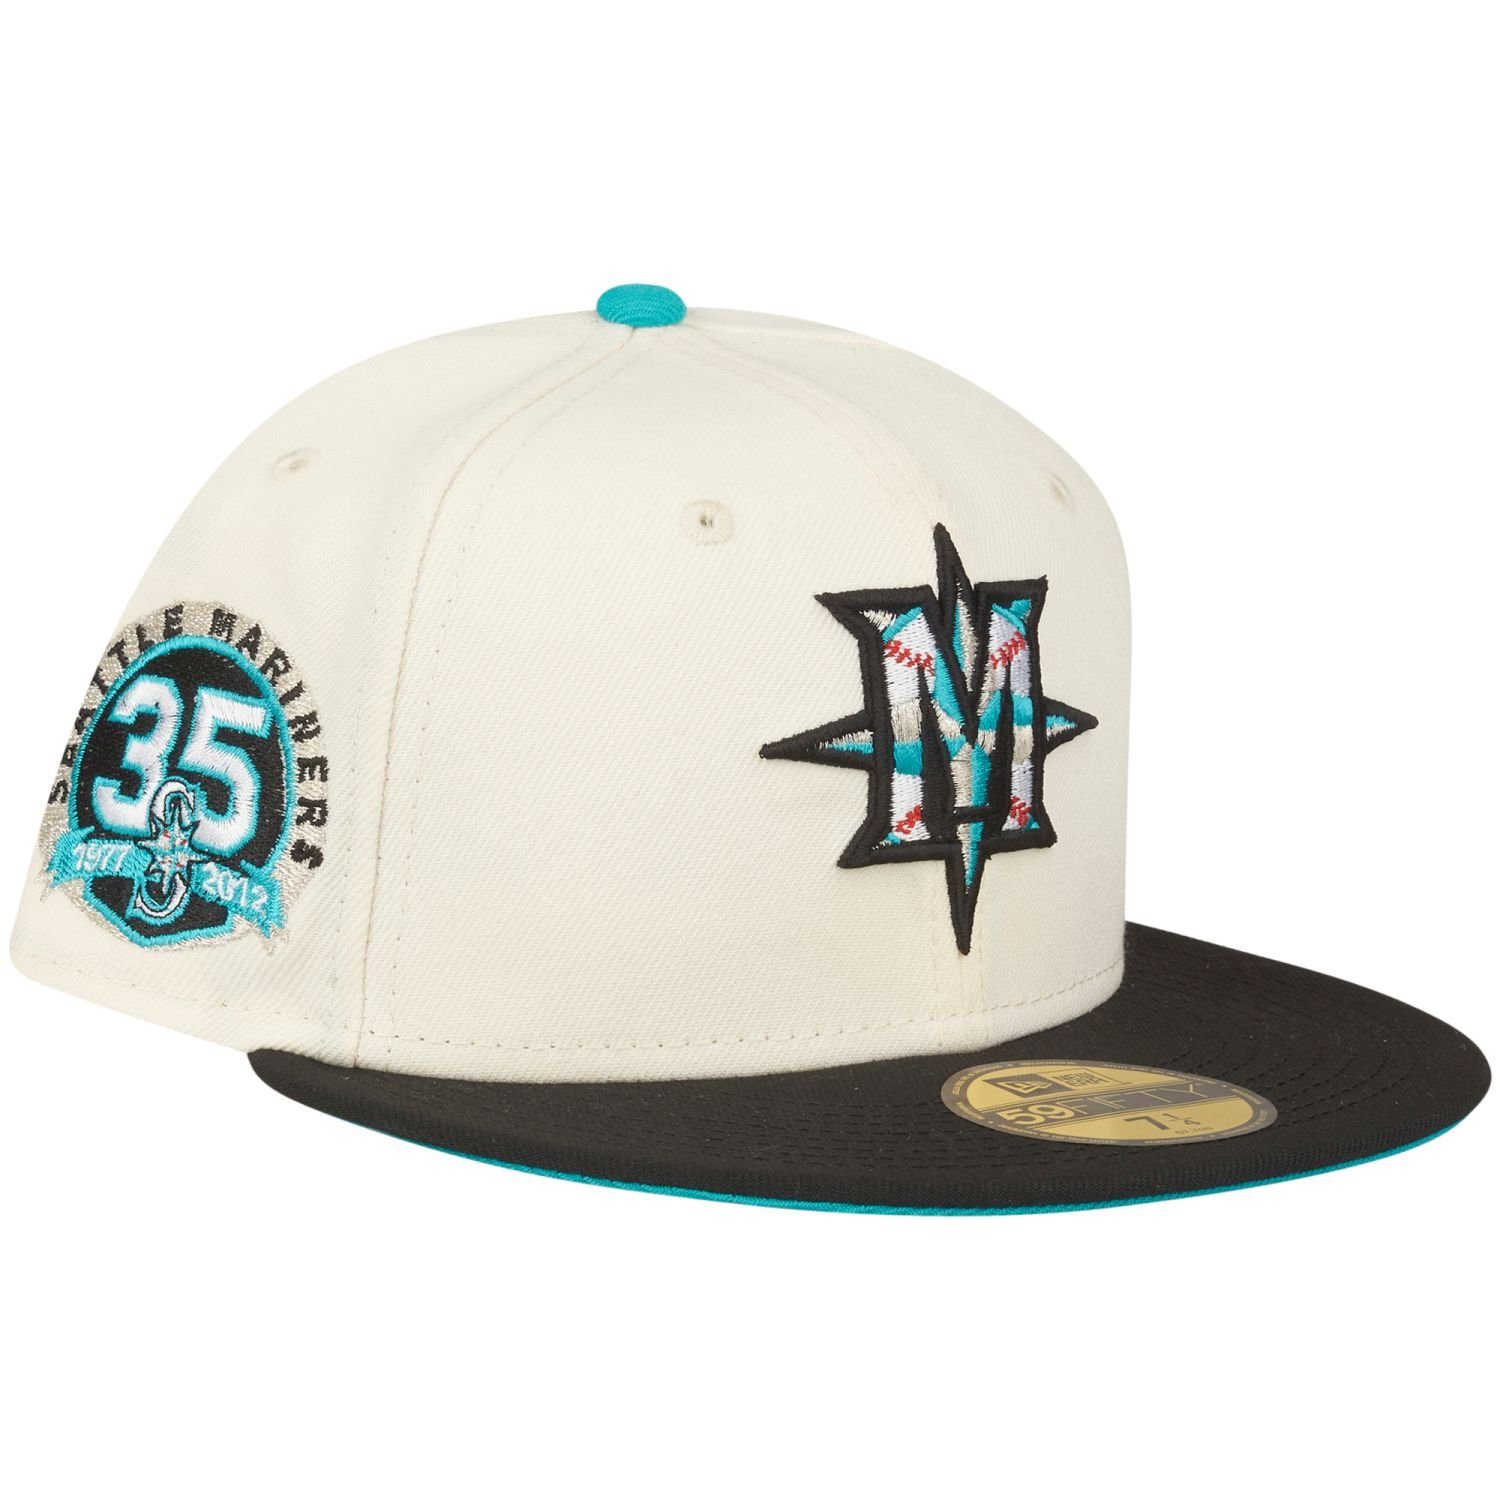 ANNIVERSARY Fitted Era New Cap Seattle 59Fifty Mariners